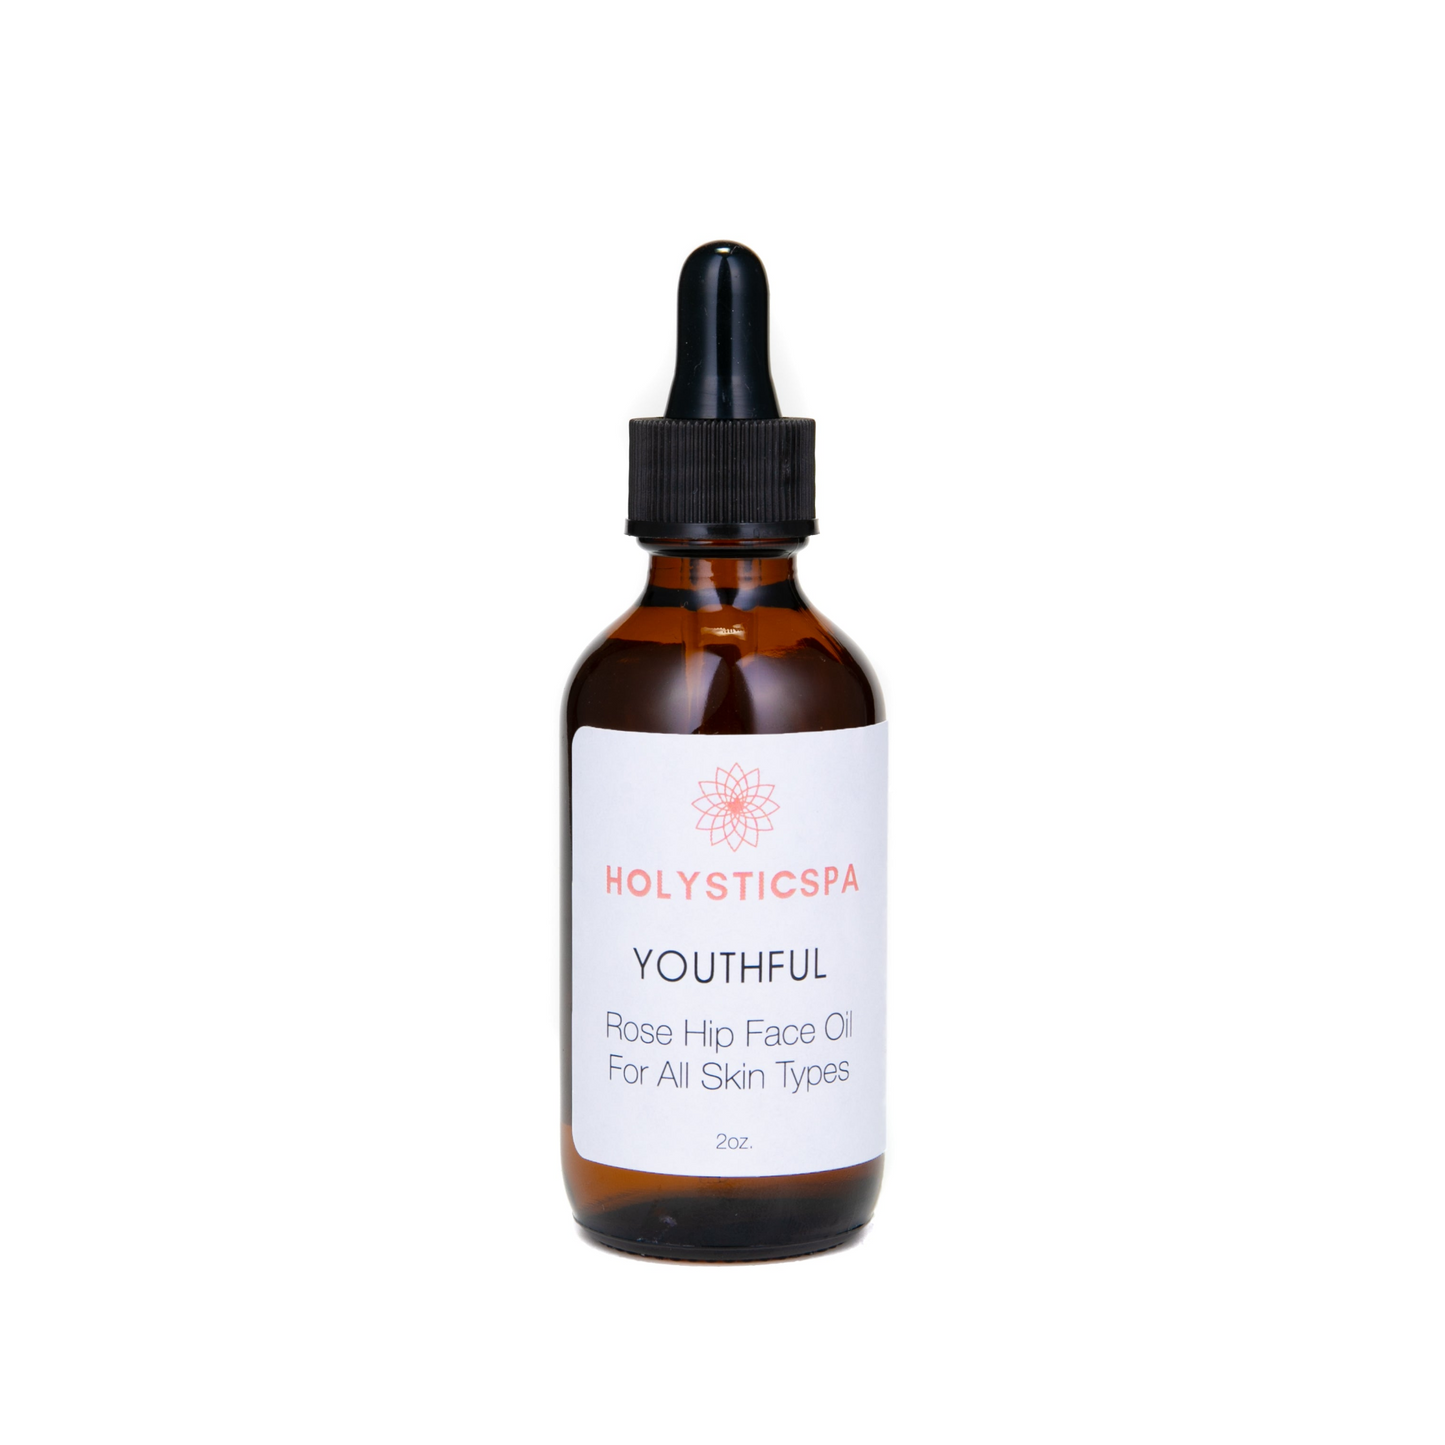 Youthful Rosehip Face Oil